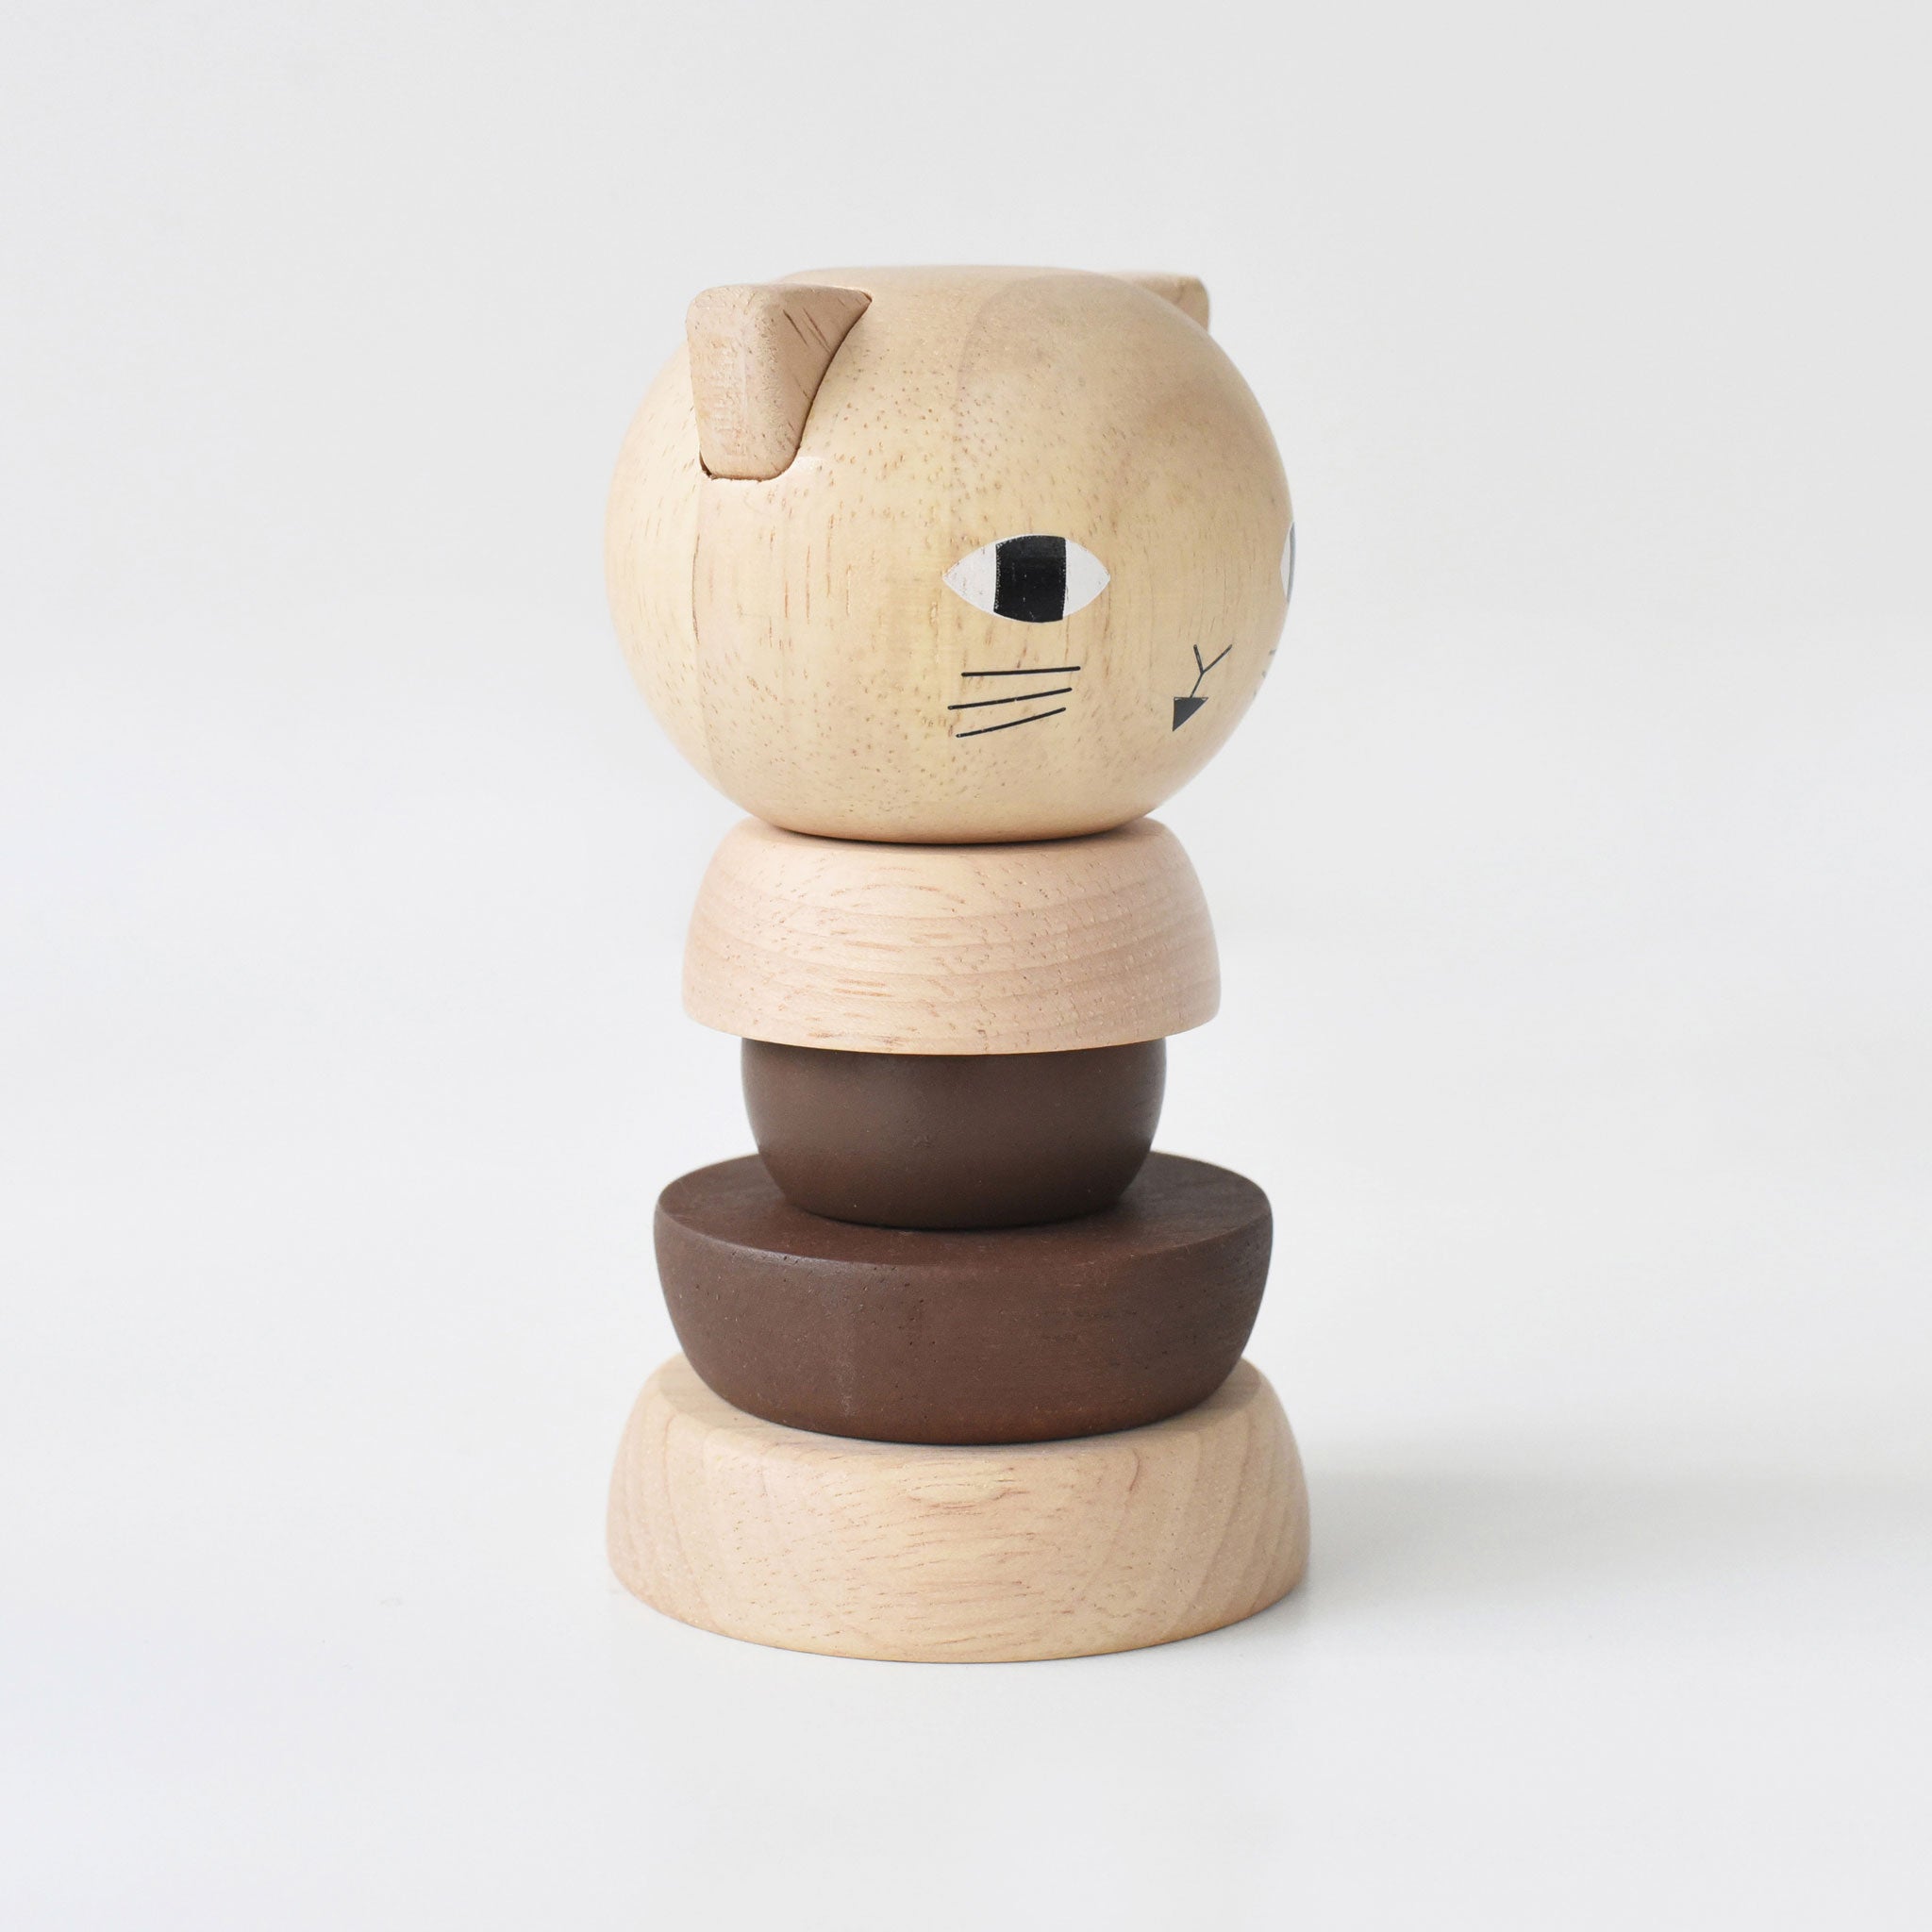 wee-gallery-wooden-toys-cat-creative-stacking-toy-baby-toddler-3.jpg